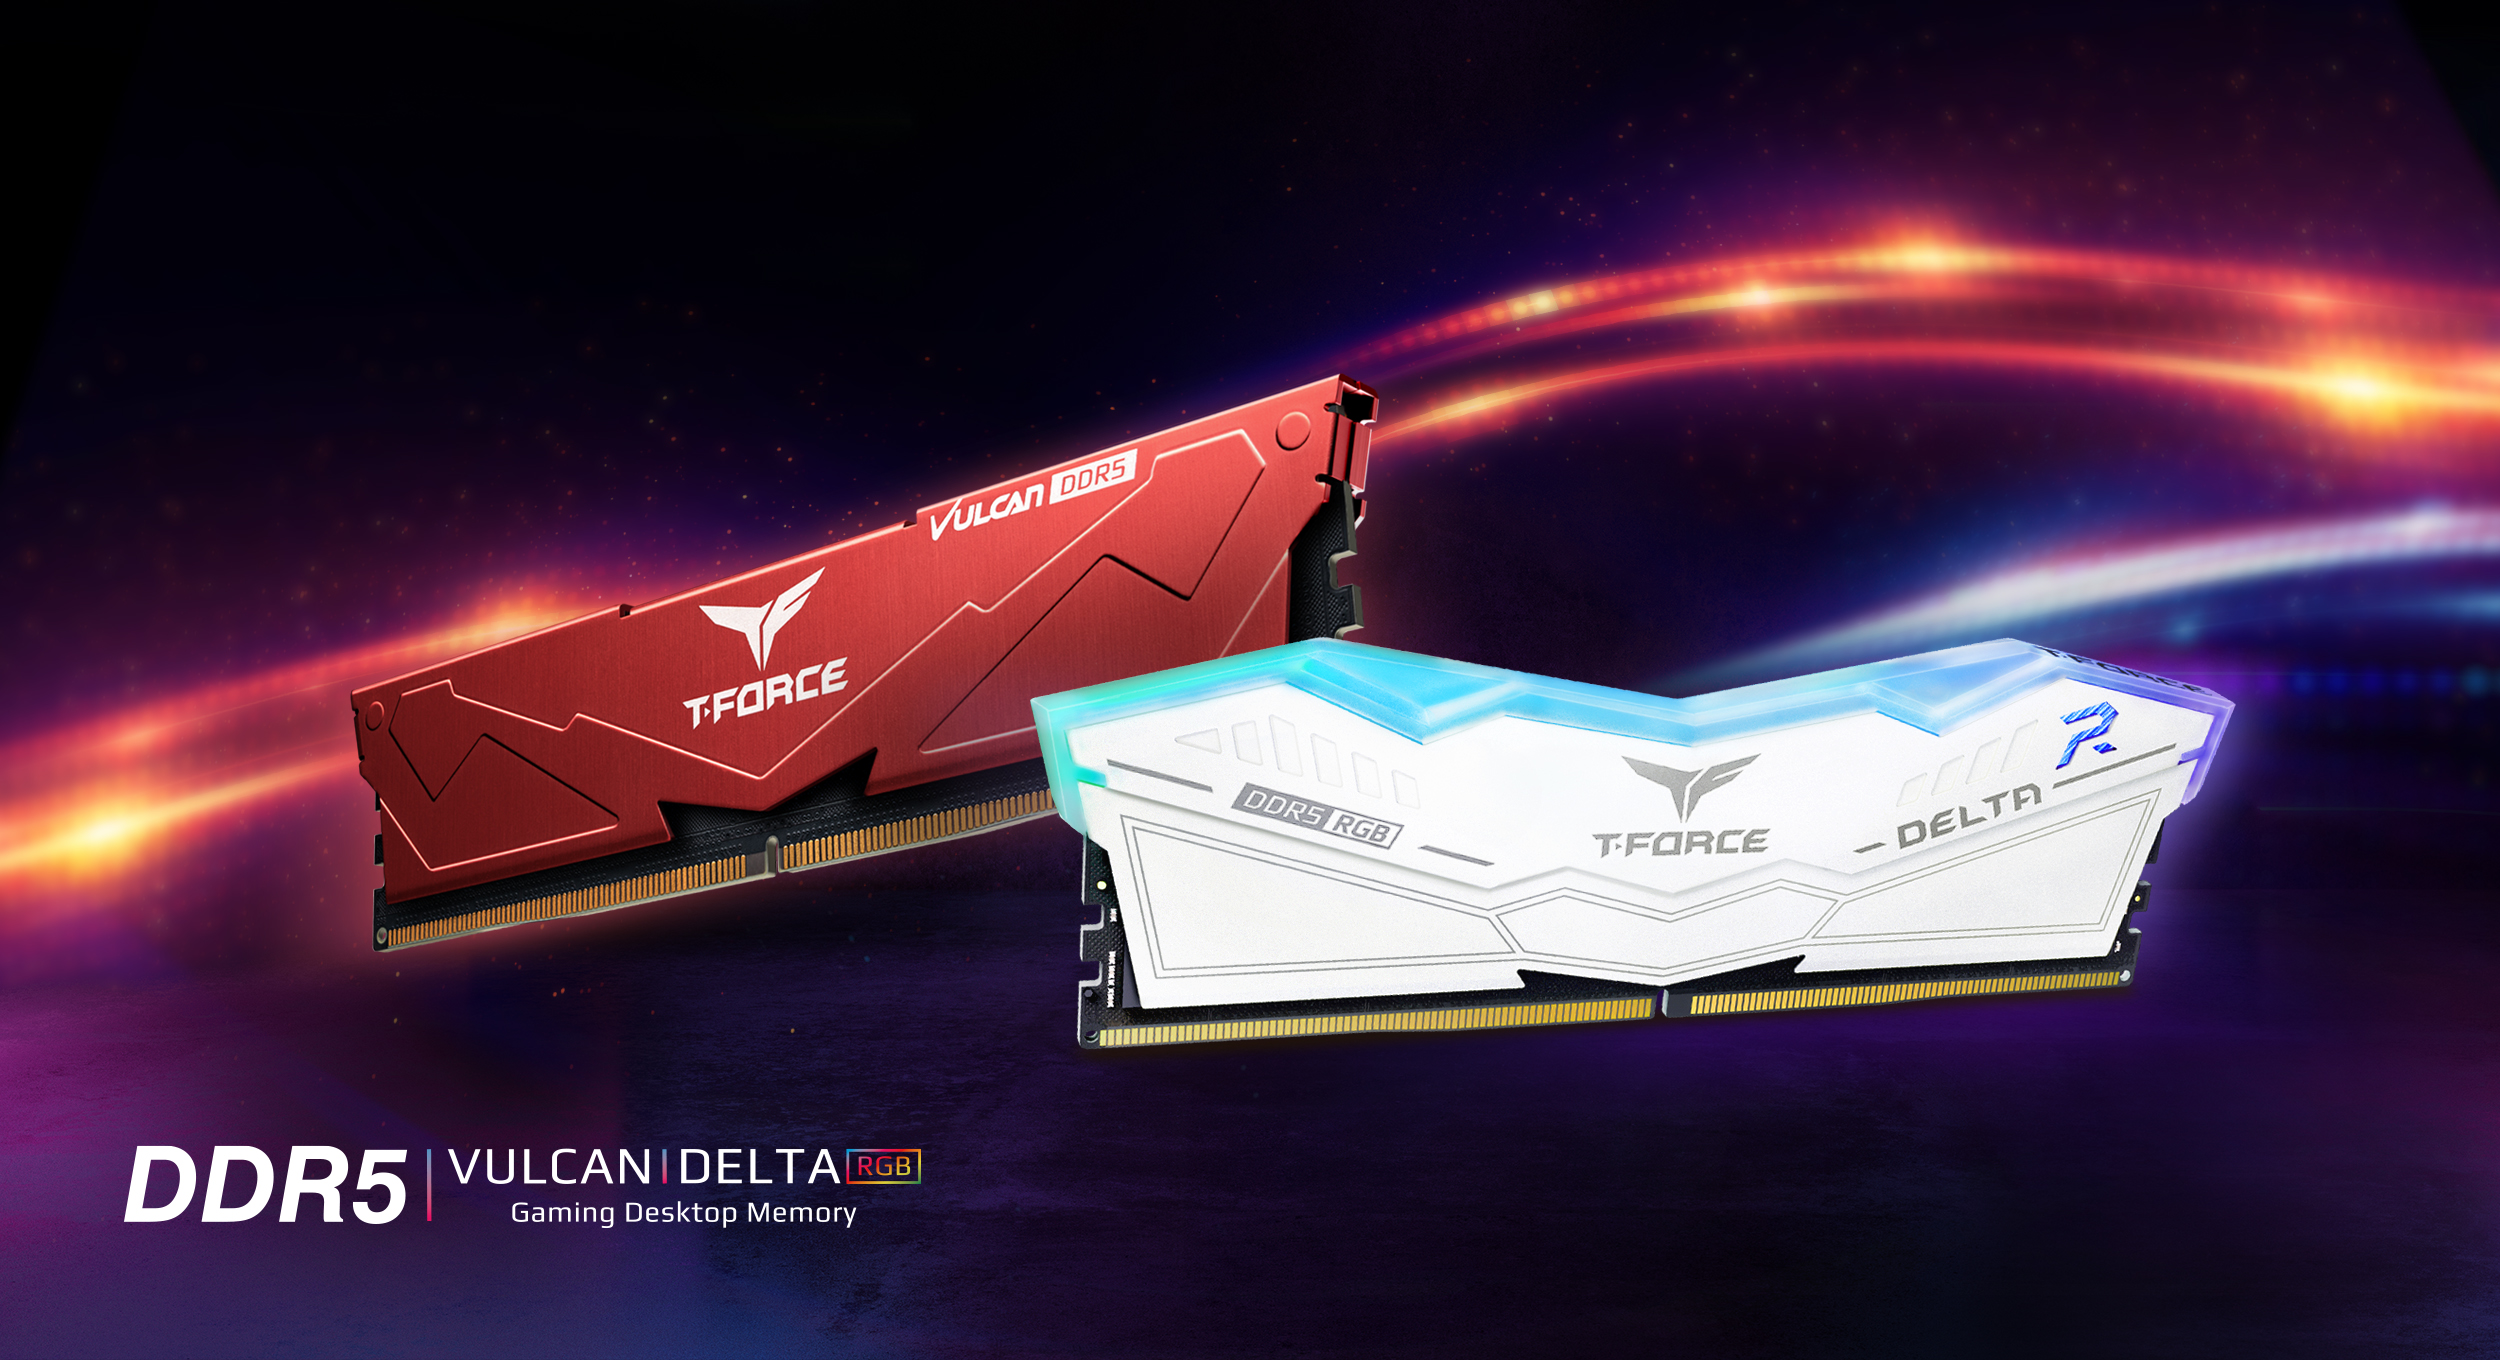 TEAMGROUP T-FORCE DELTA RGB DDR5 & VULCAN DDR5 are Released to the Global Market Overclocking Memory Marking a New Era with Exceptional Speed